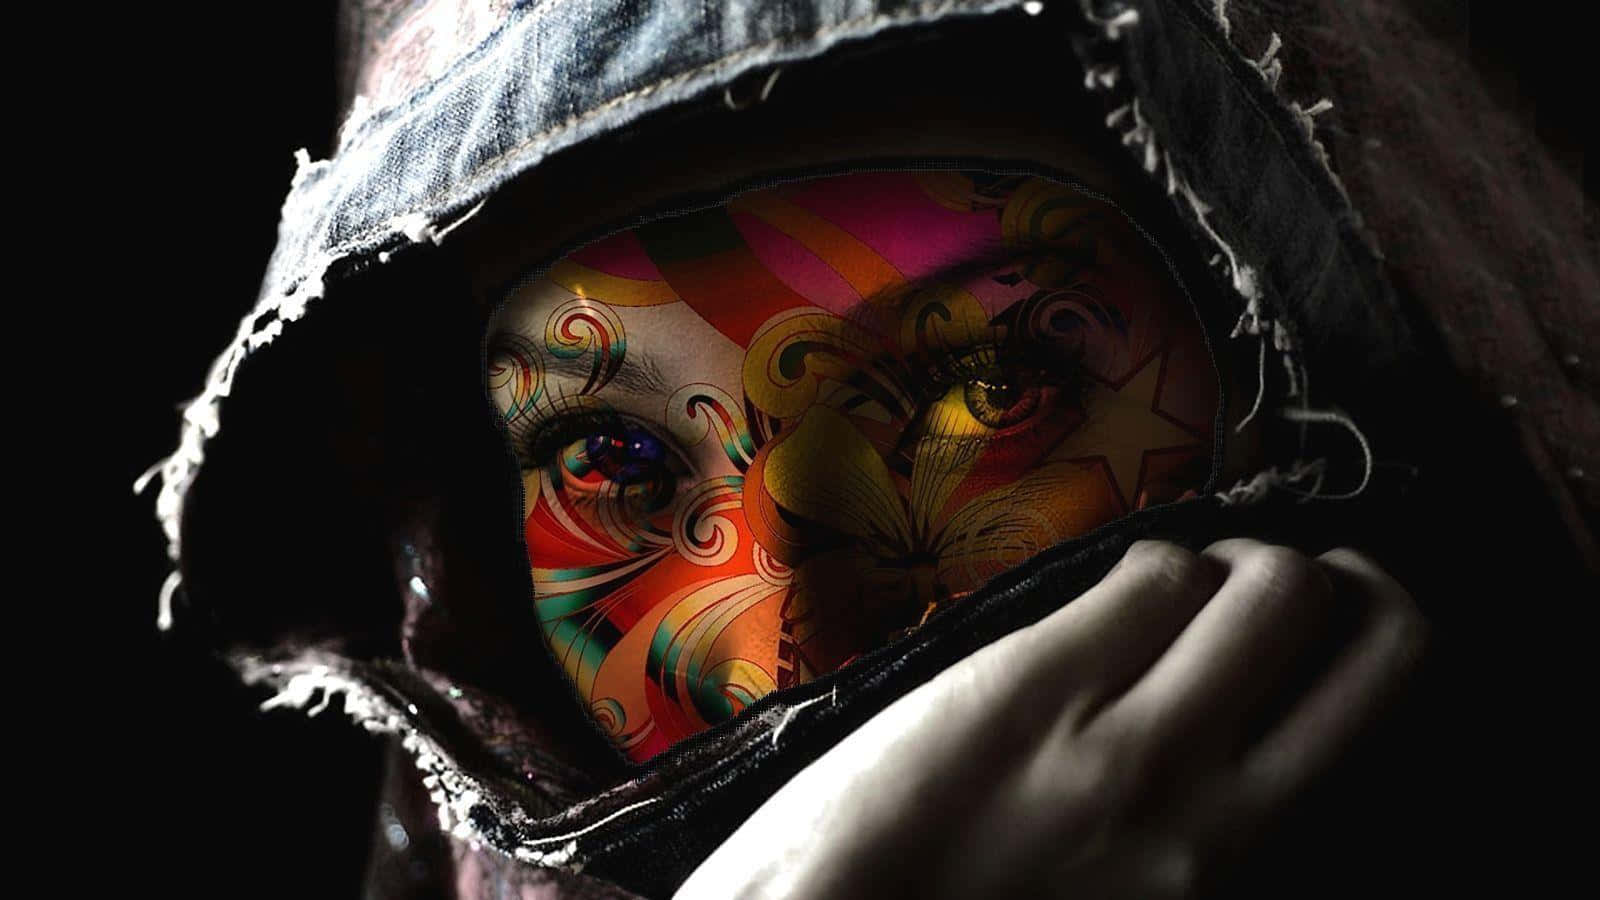 Explore your creativity with tattoo art.